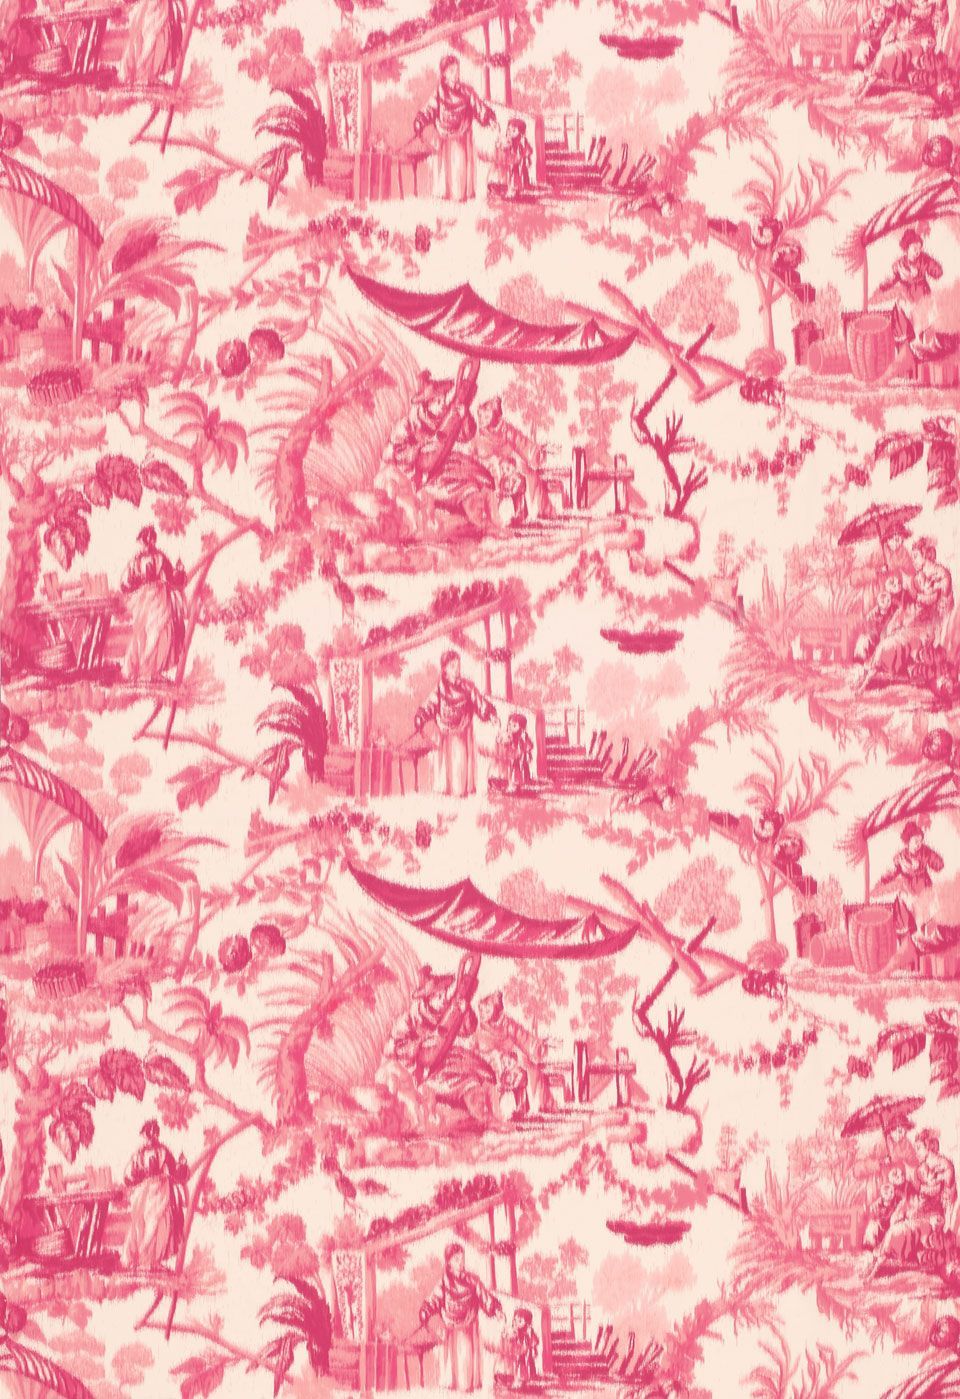 Fabric | Pavillon Chinois In Peony | Schumacher Inside Current Blended Fabric Classic French Rococo Woven Tapestries (View 19 of 20)